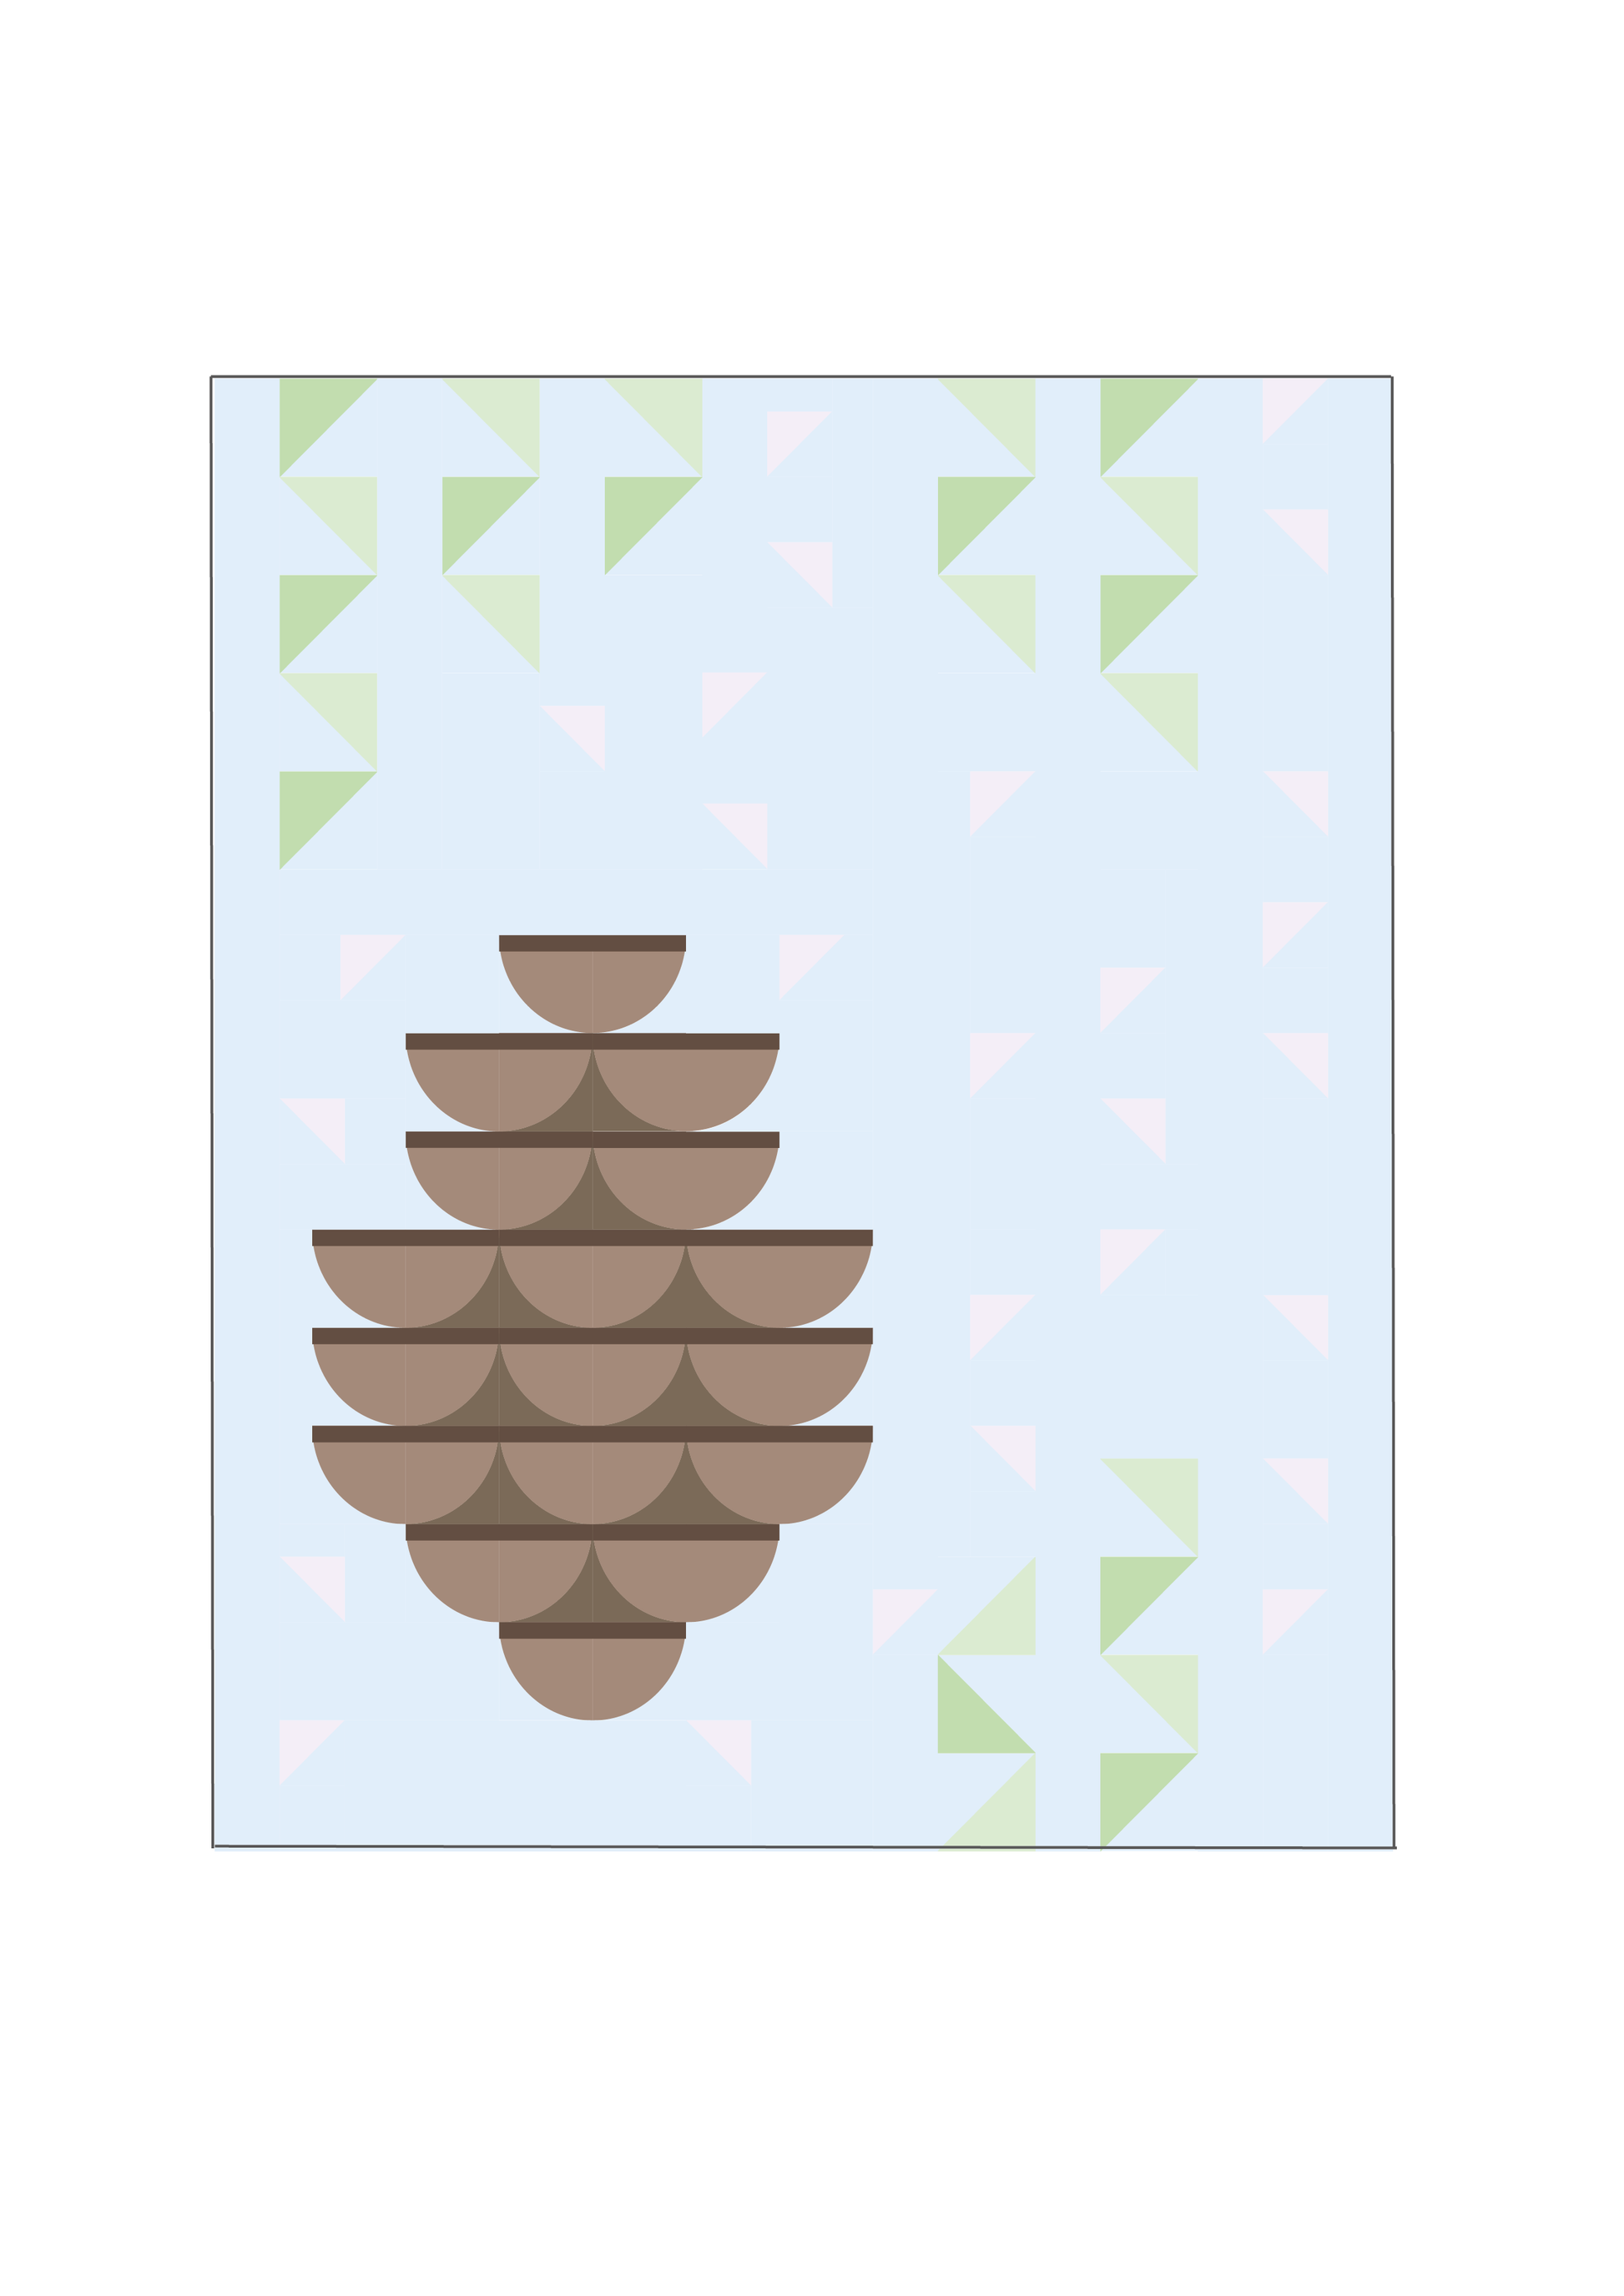 Drawing of pine cone quilt